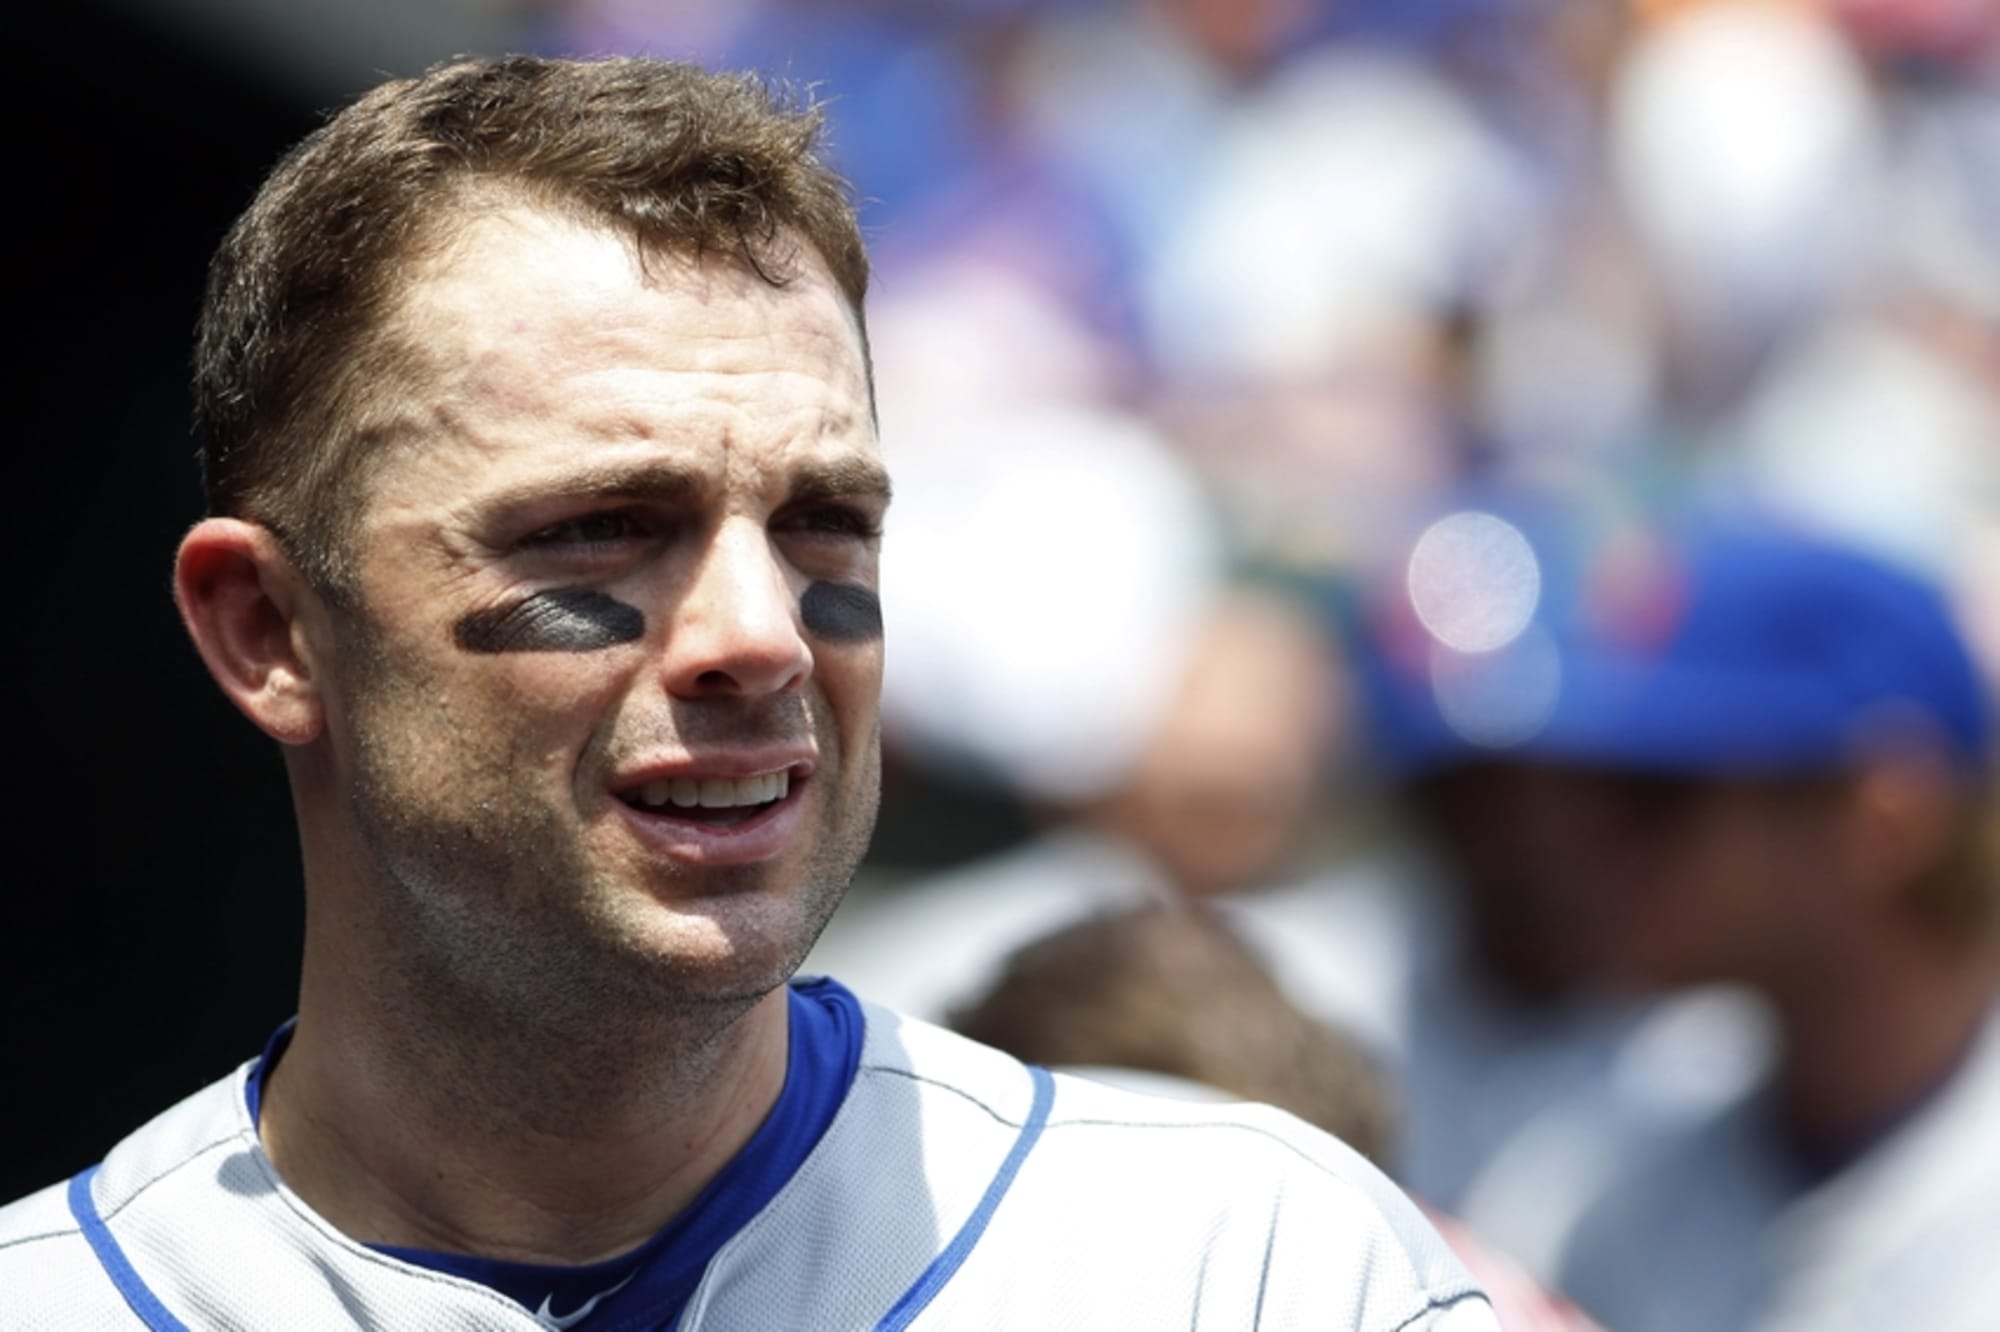 New York Mets Player David Wright Announced He's Retiring Due to Spinal  Stenosis